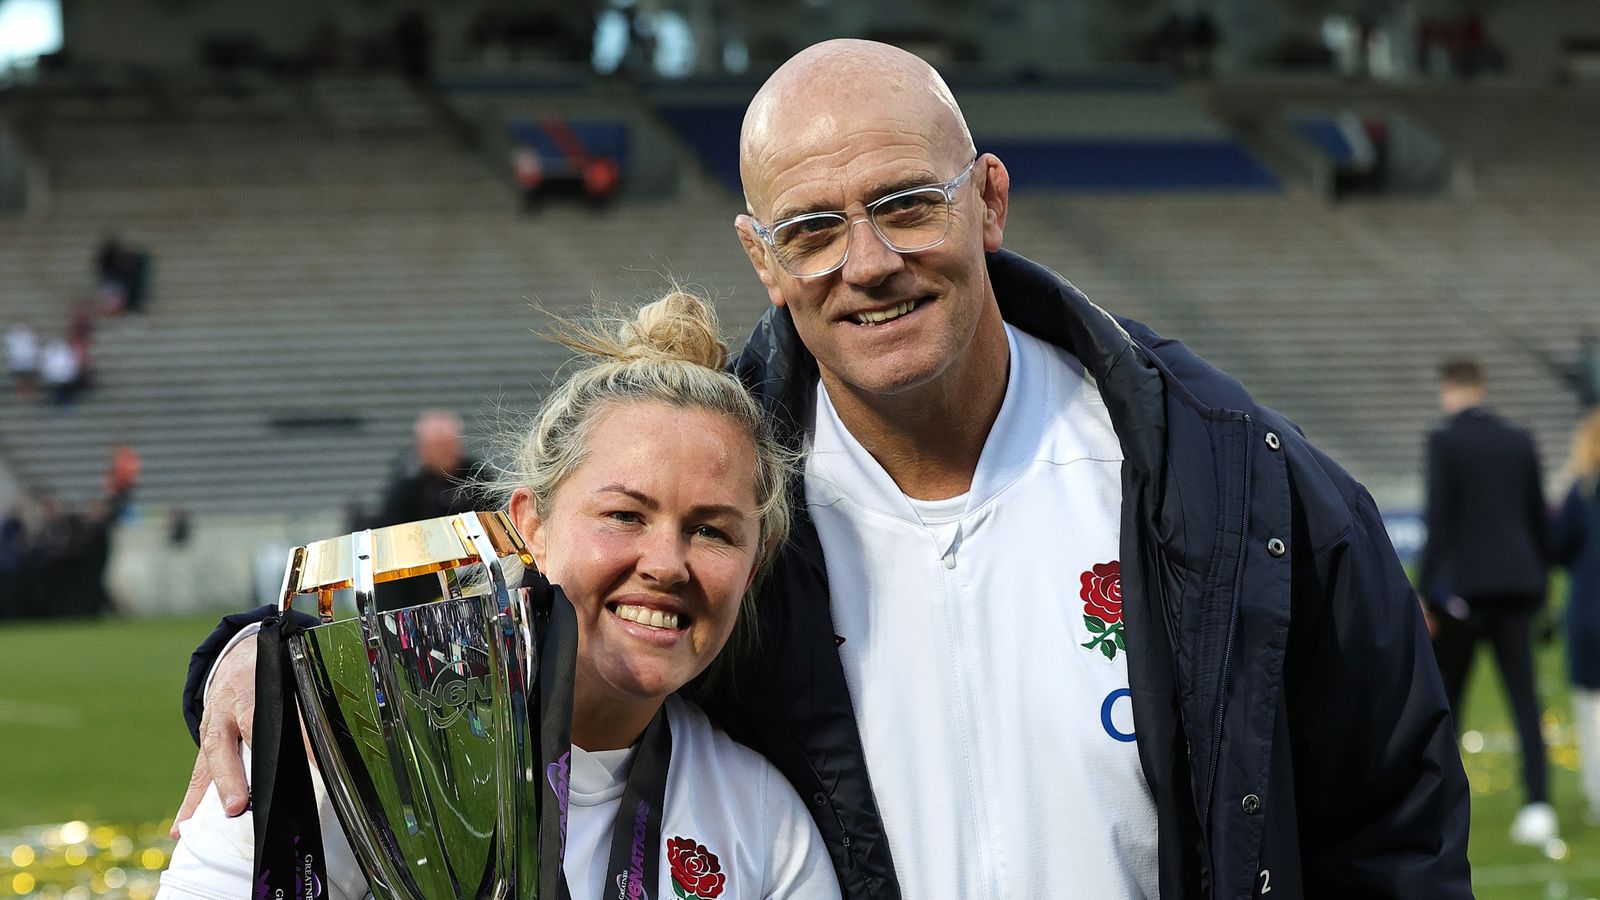 England’s Red Roses ‘stay the best’ with Six Nations Grand Slam success in new era under John Mitchell | Rugby Union News